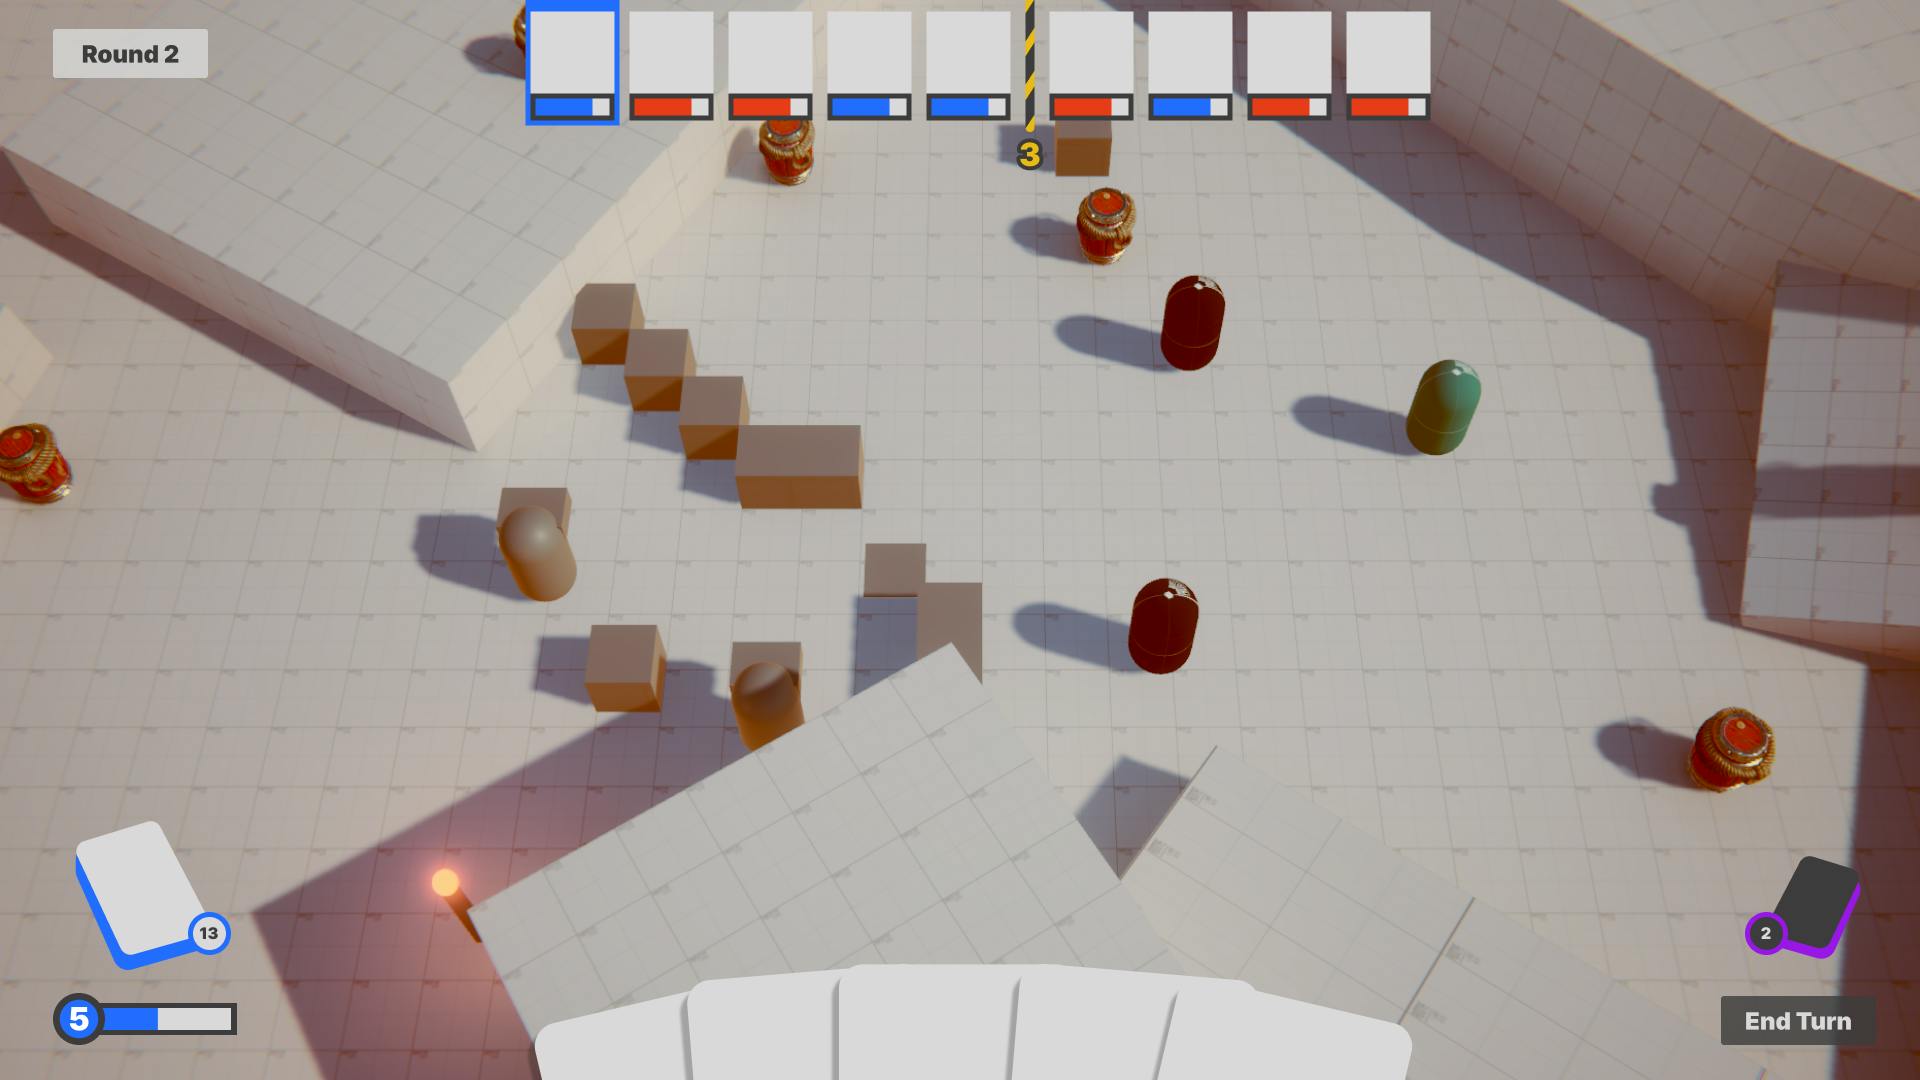 A blocky game prototype showing capsules and some UI elements.